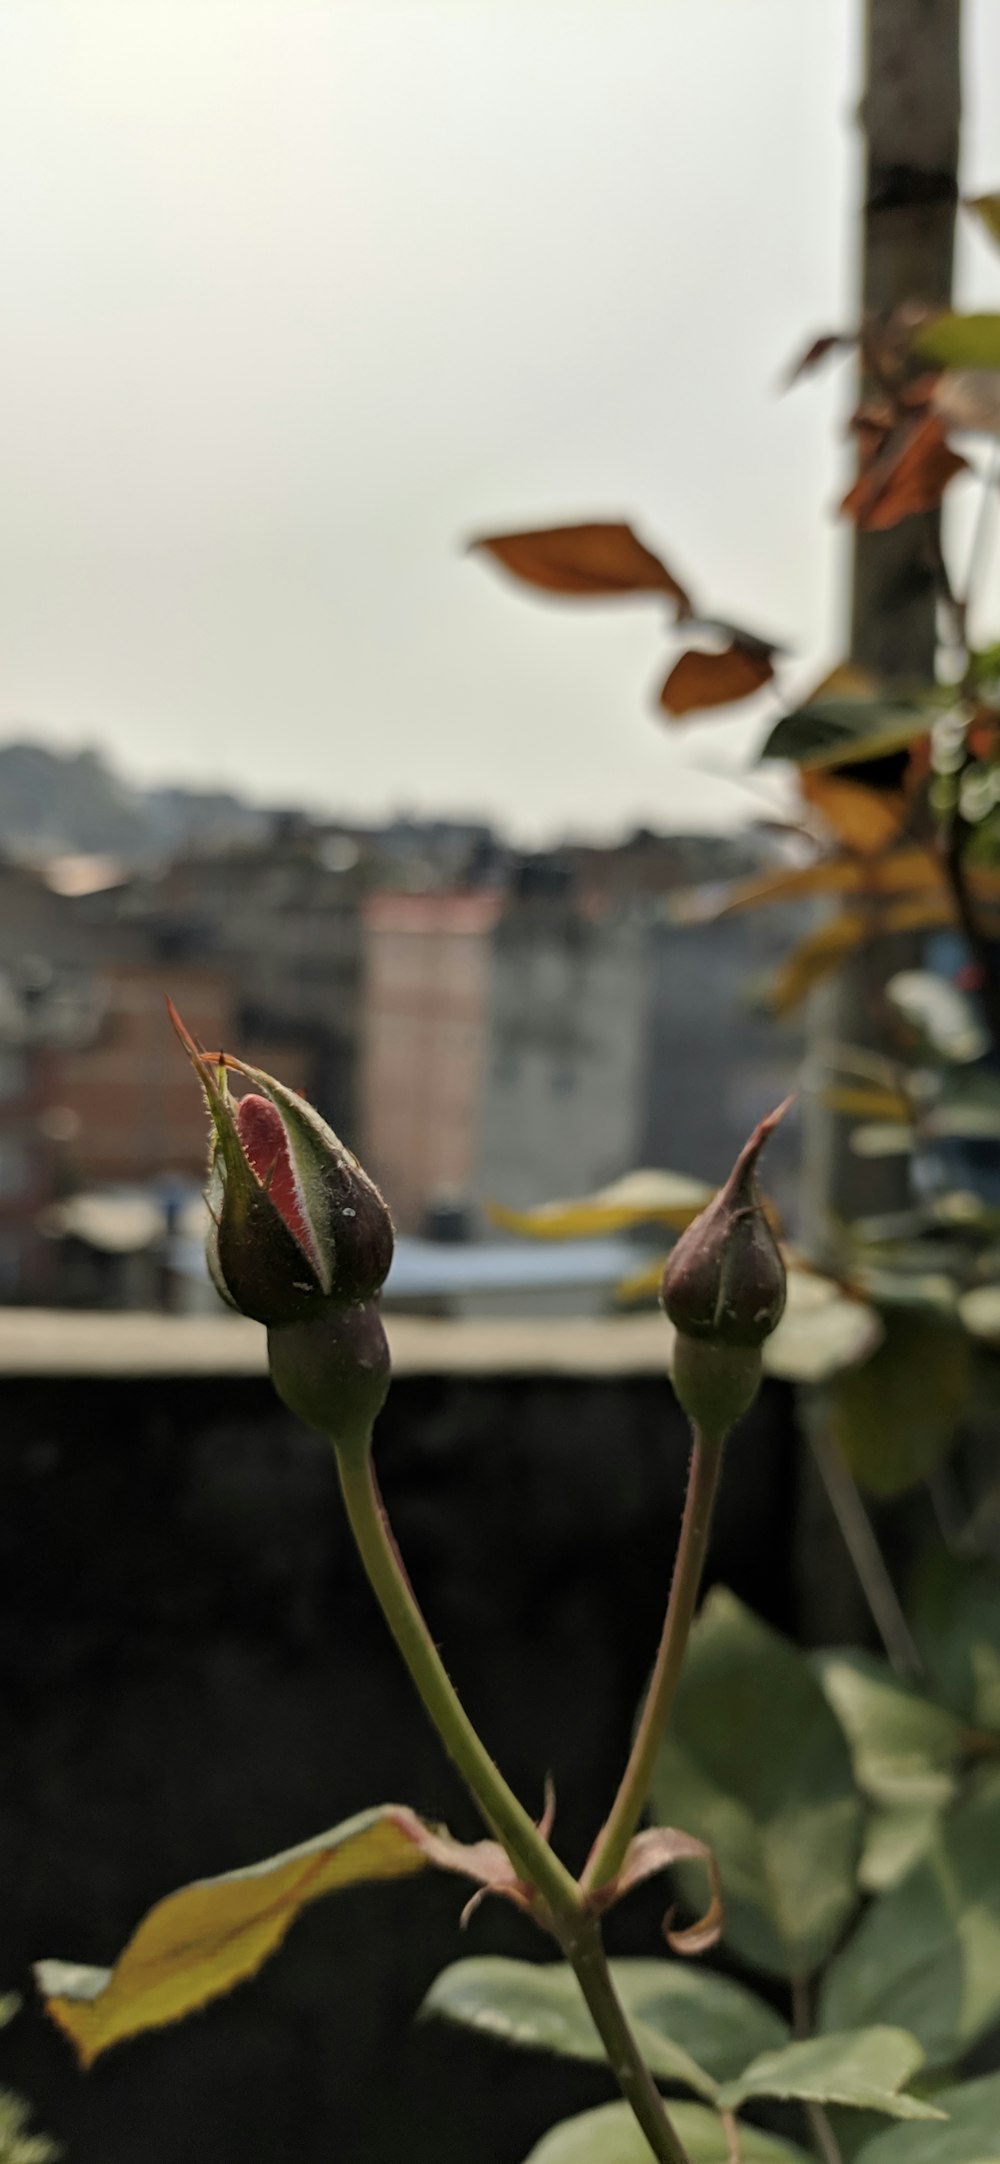 a budding plant with a view of a city in the background